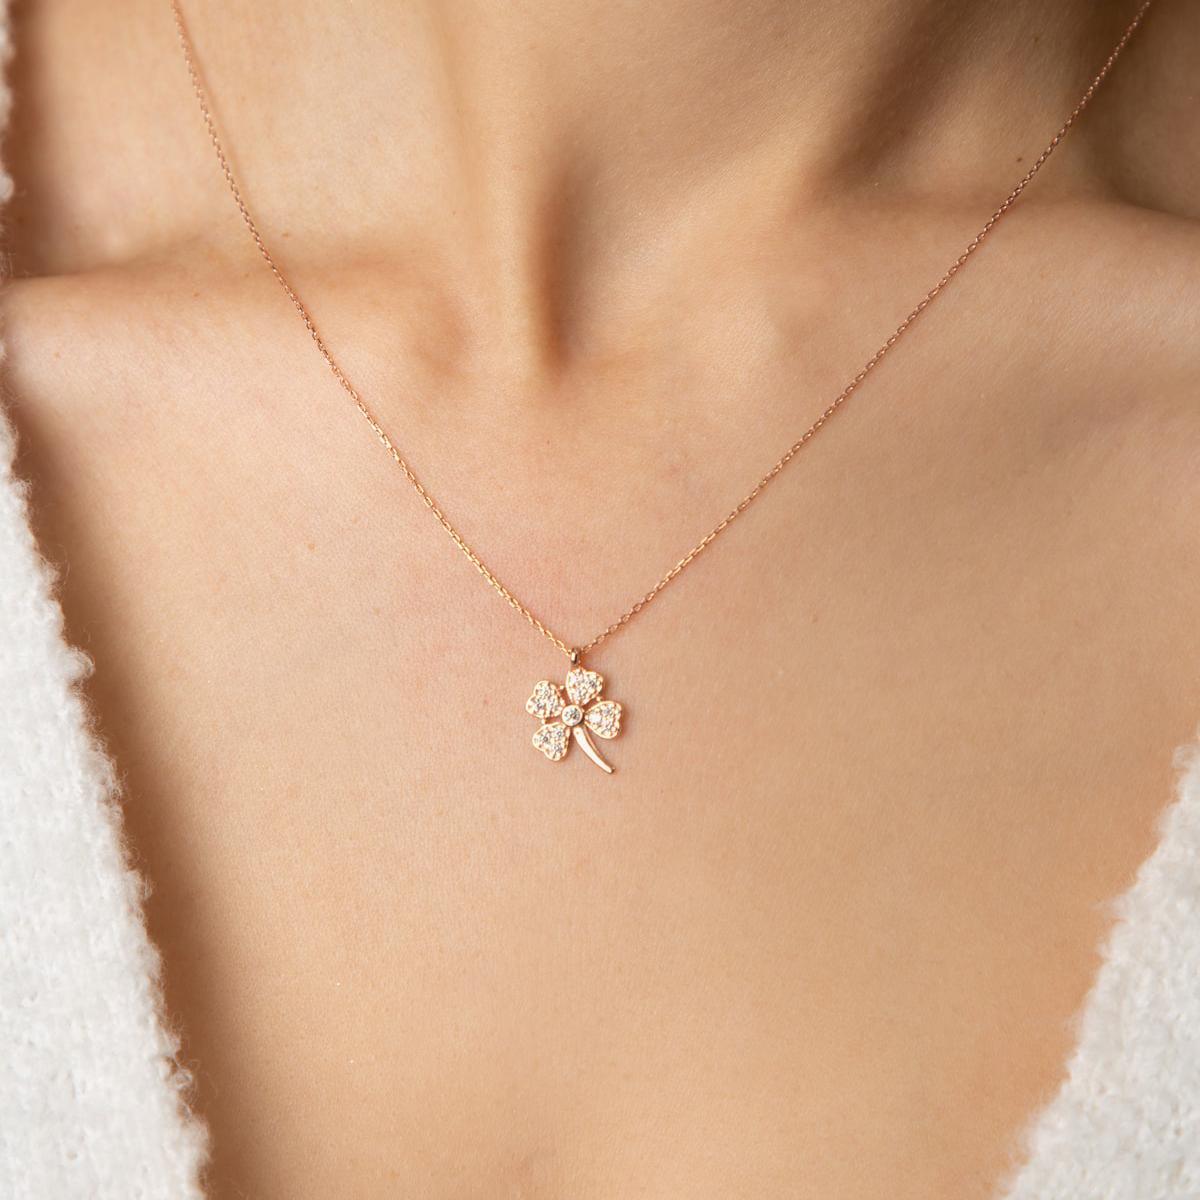 Clover Diamond Necklace • Four Leaf Clover Necklace • Luck Necklace - Trending Silver Gifts